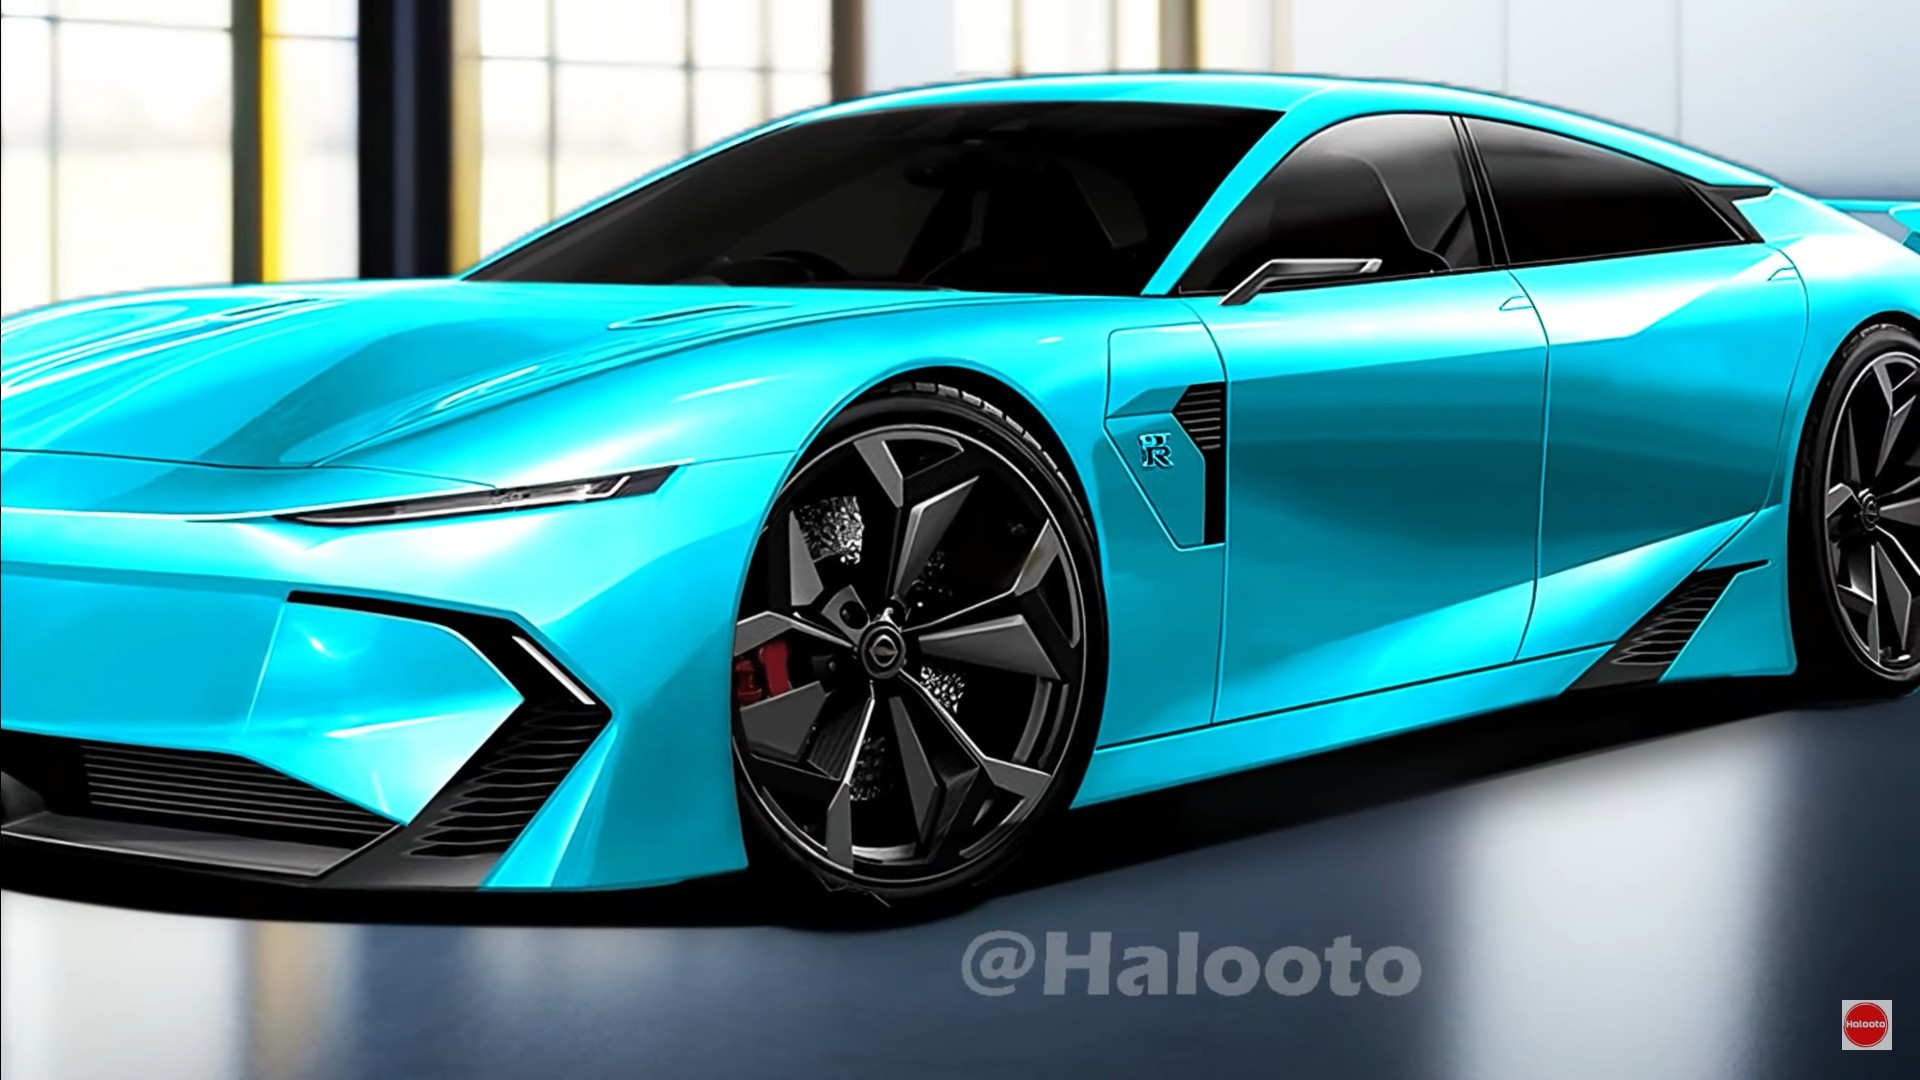 Next-Gen Nissan GT-R Envisioned By Independent Designer With R34